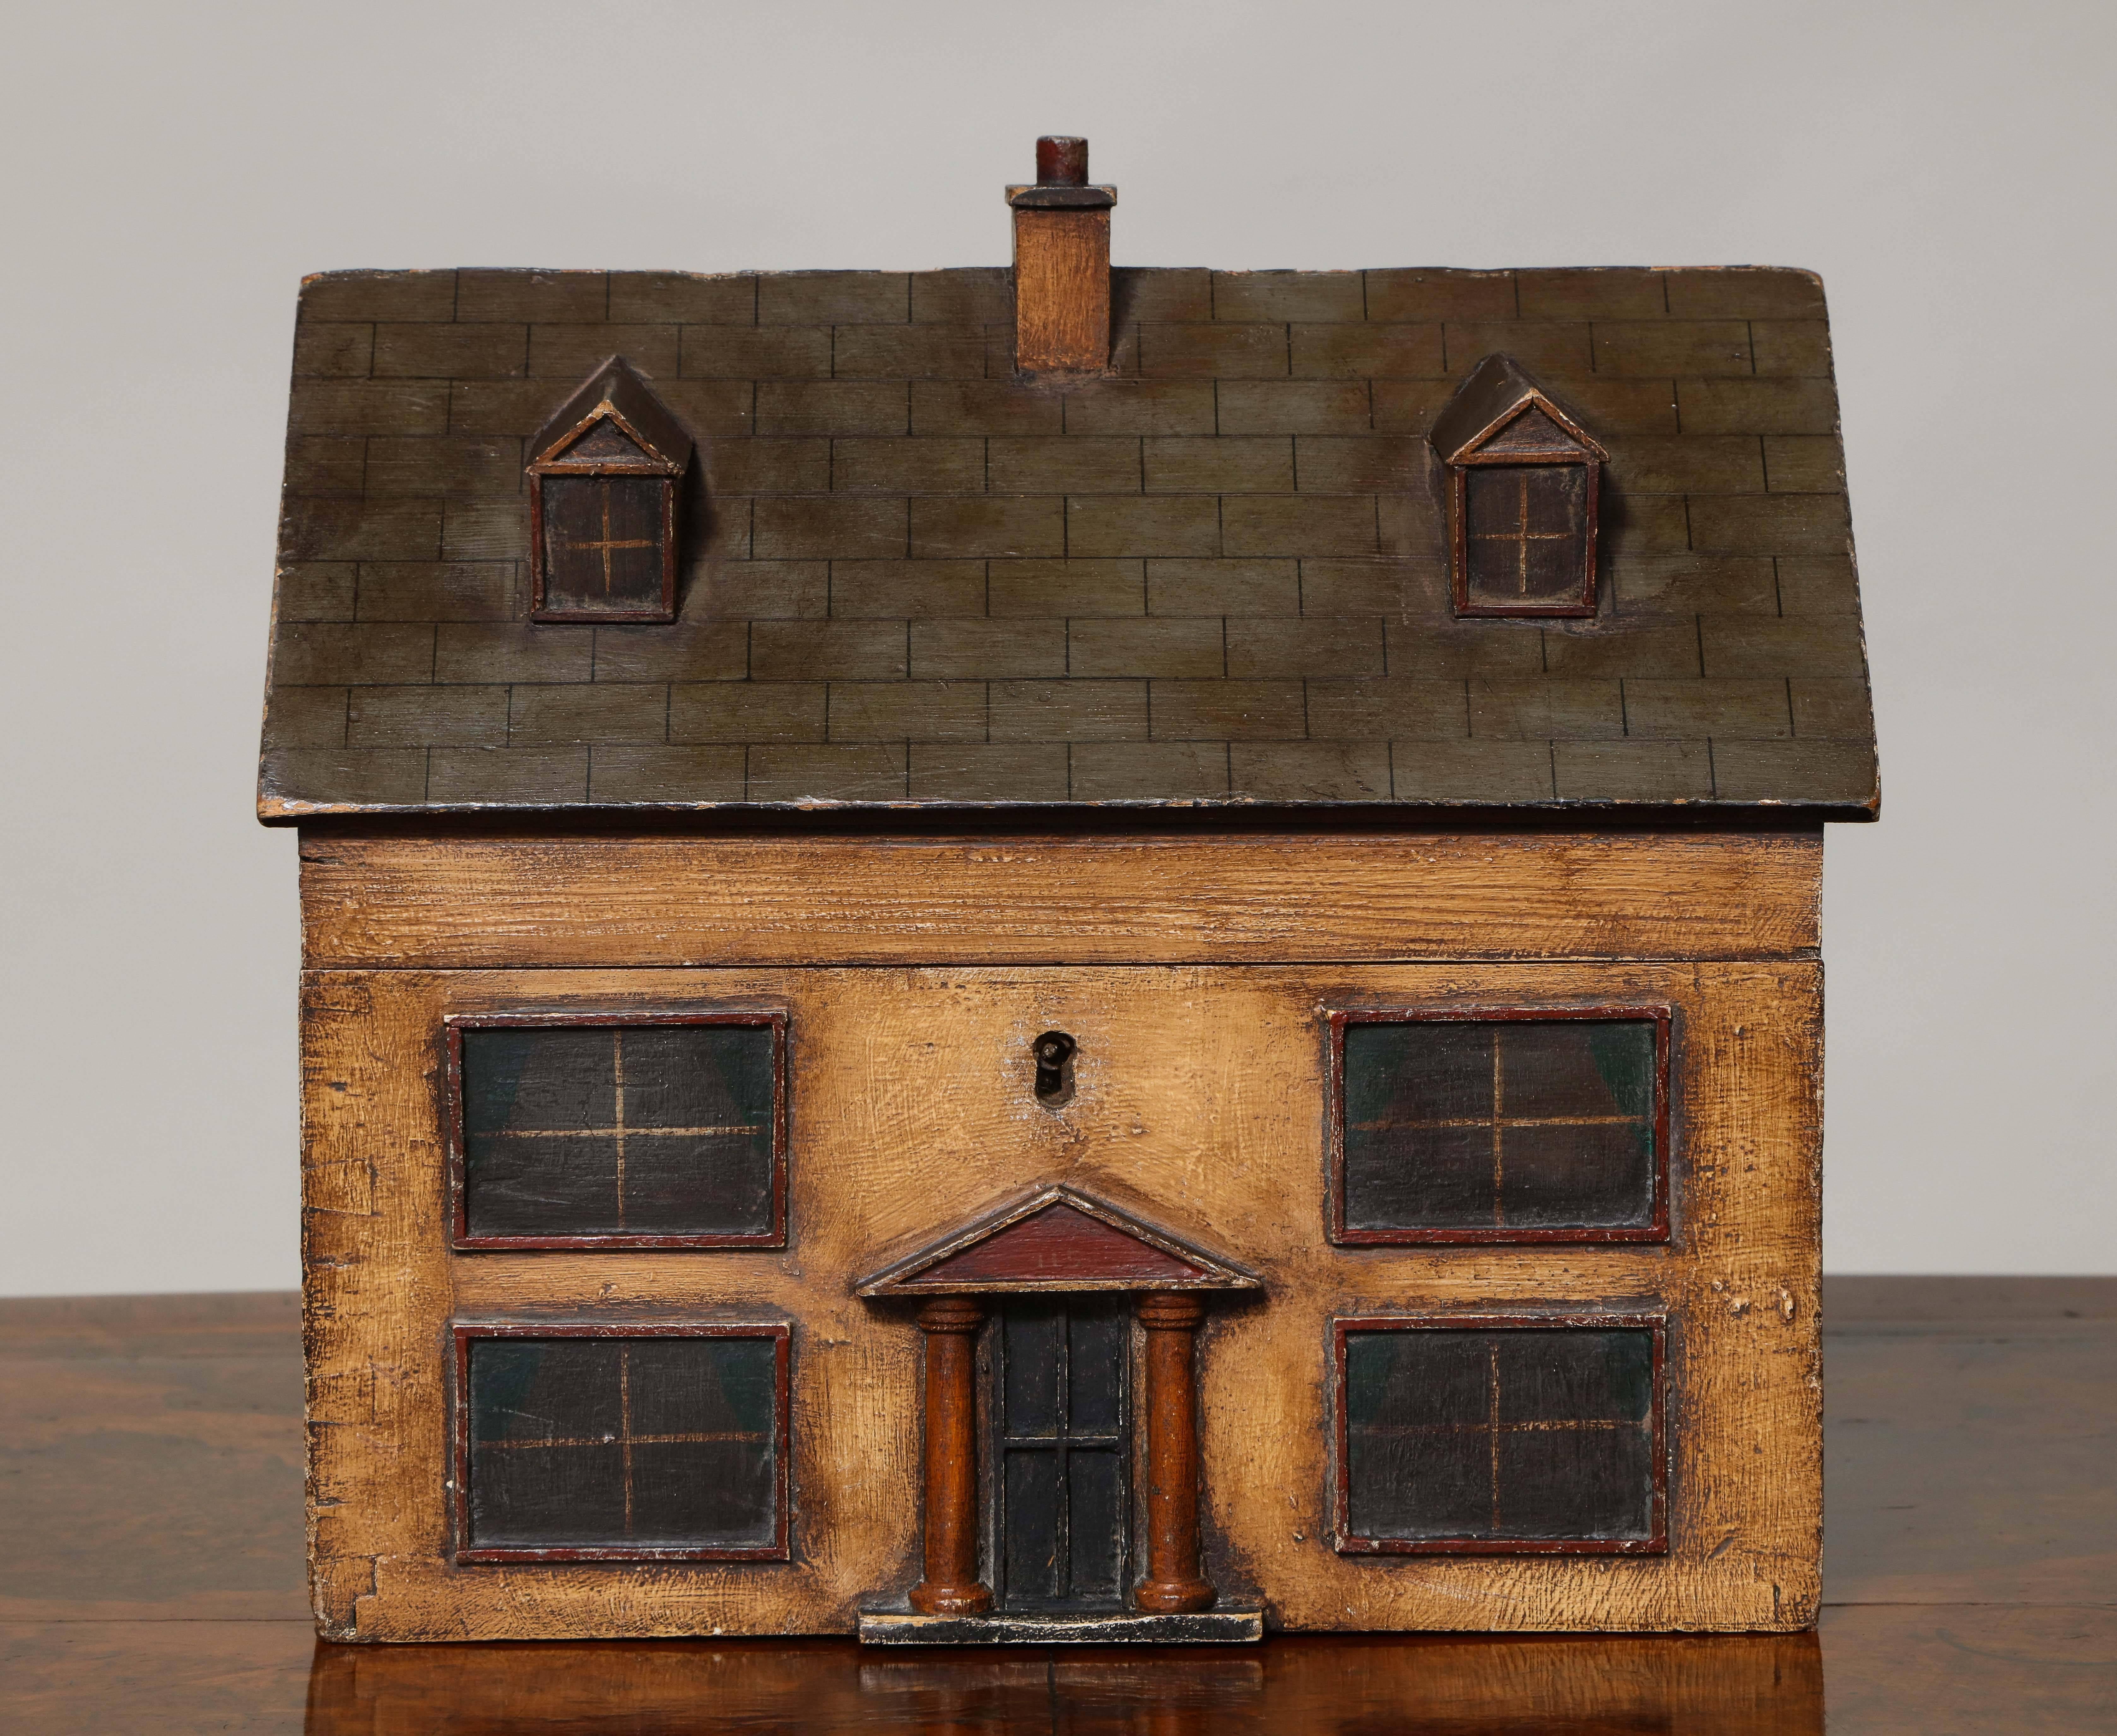 Rare 19th century English box/caddy in the form of a Georgian center hall house, the faux slate roof with center chimney and two dormer windows, the facade with columned entrance way flanked by two pairs of windows, the sides with vines and,